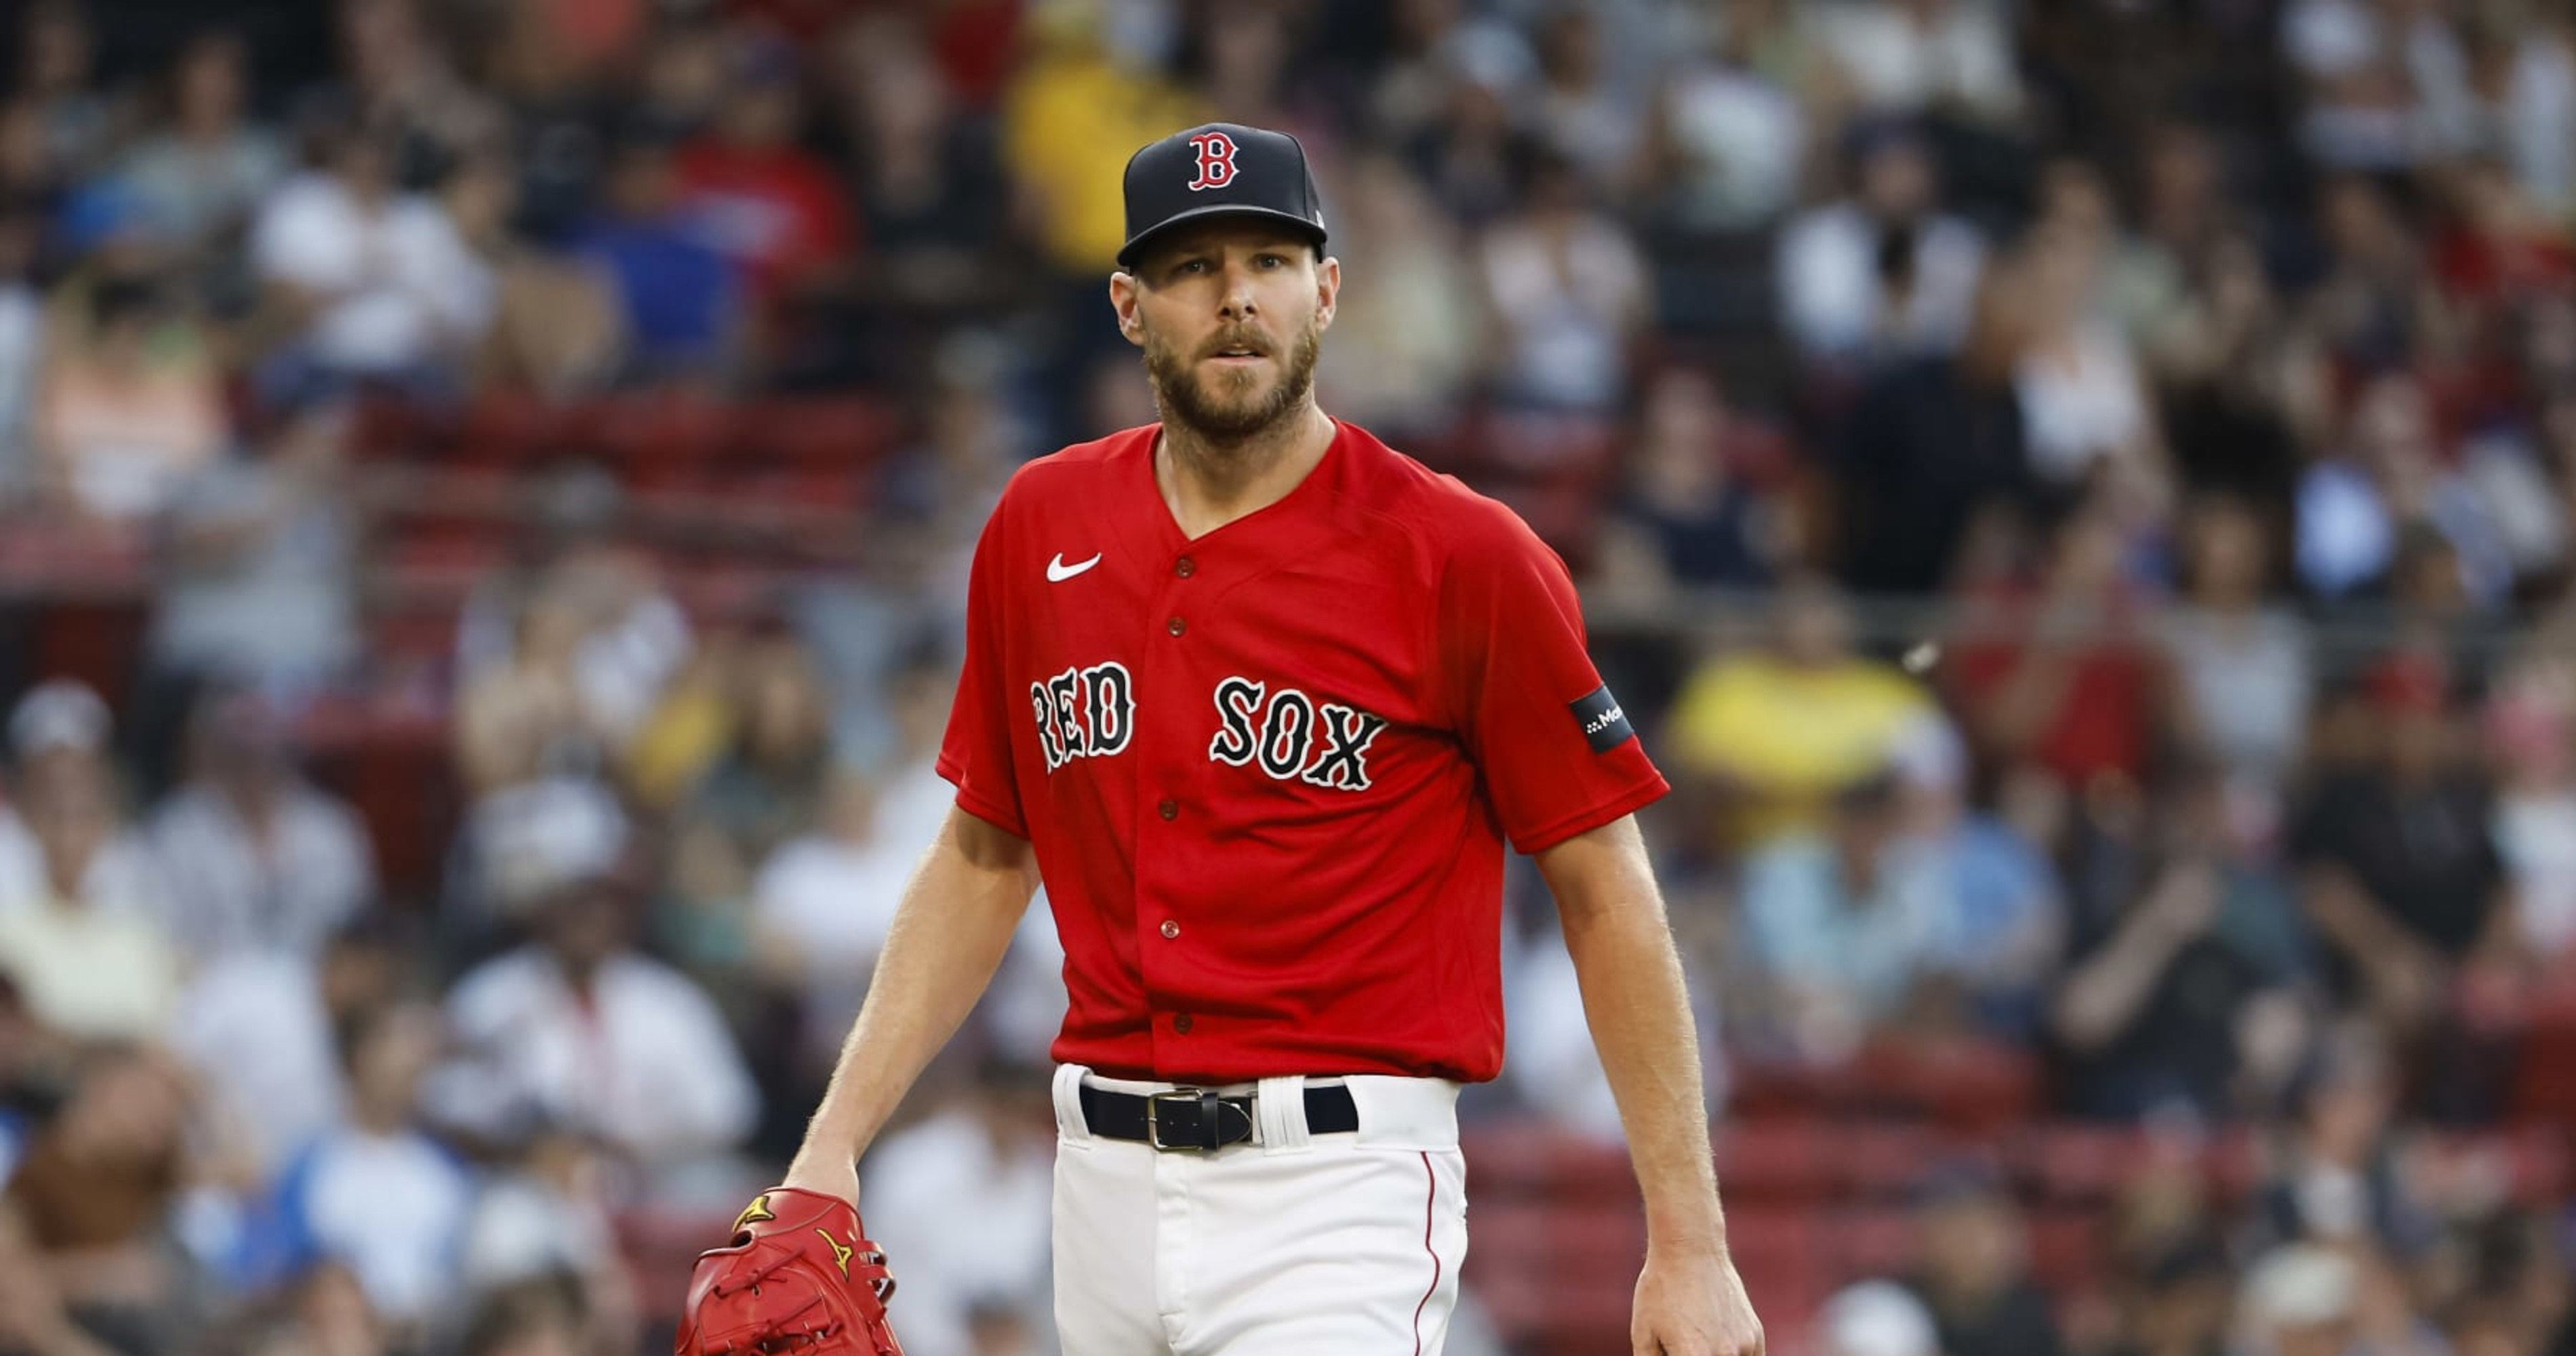 Red Sox pitcher Chris Sale undergoes surgery after bike accident